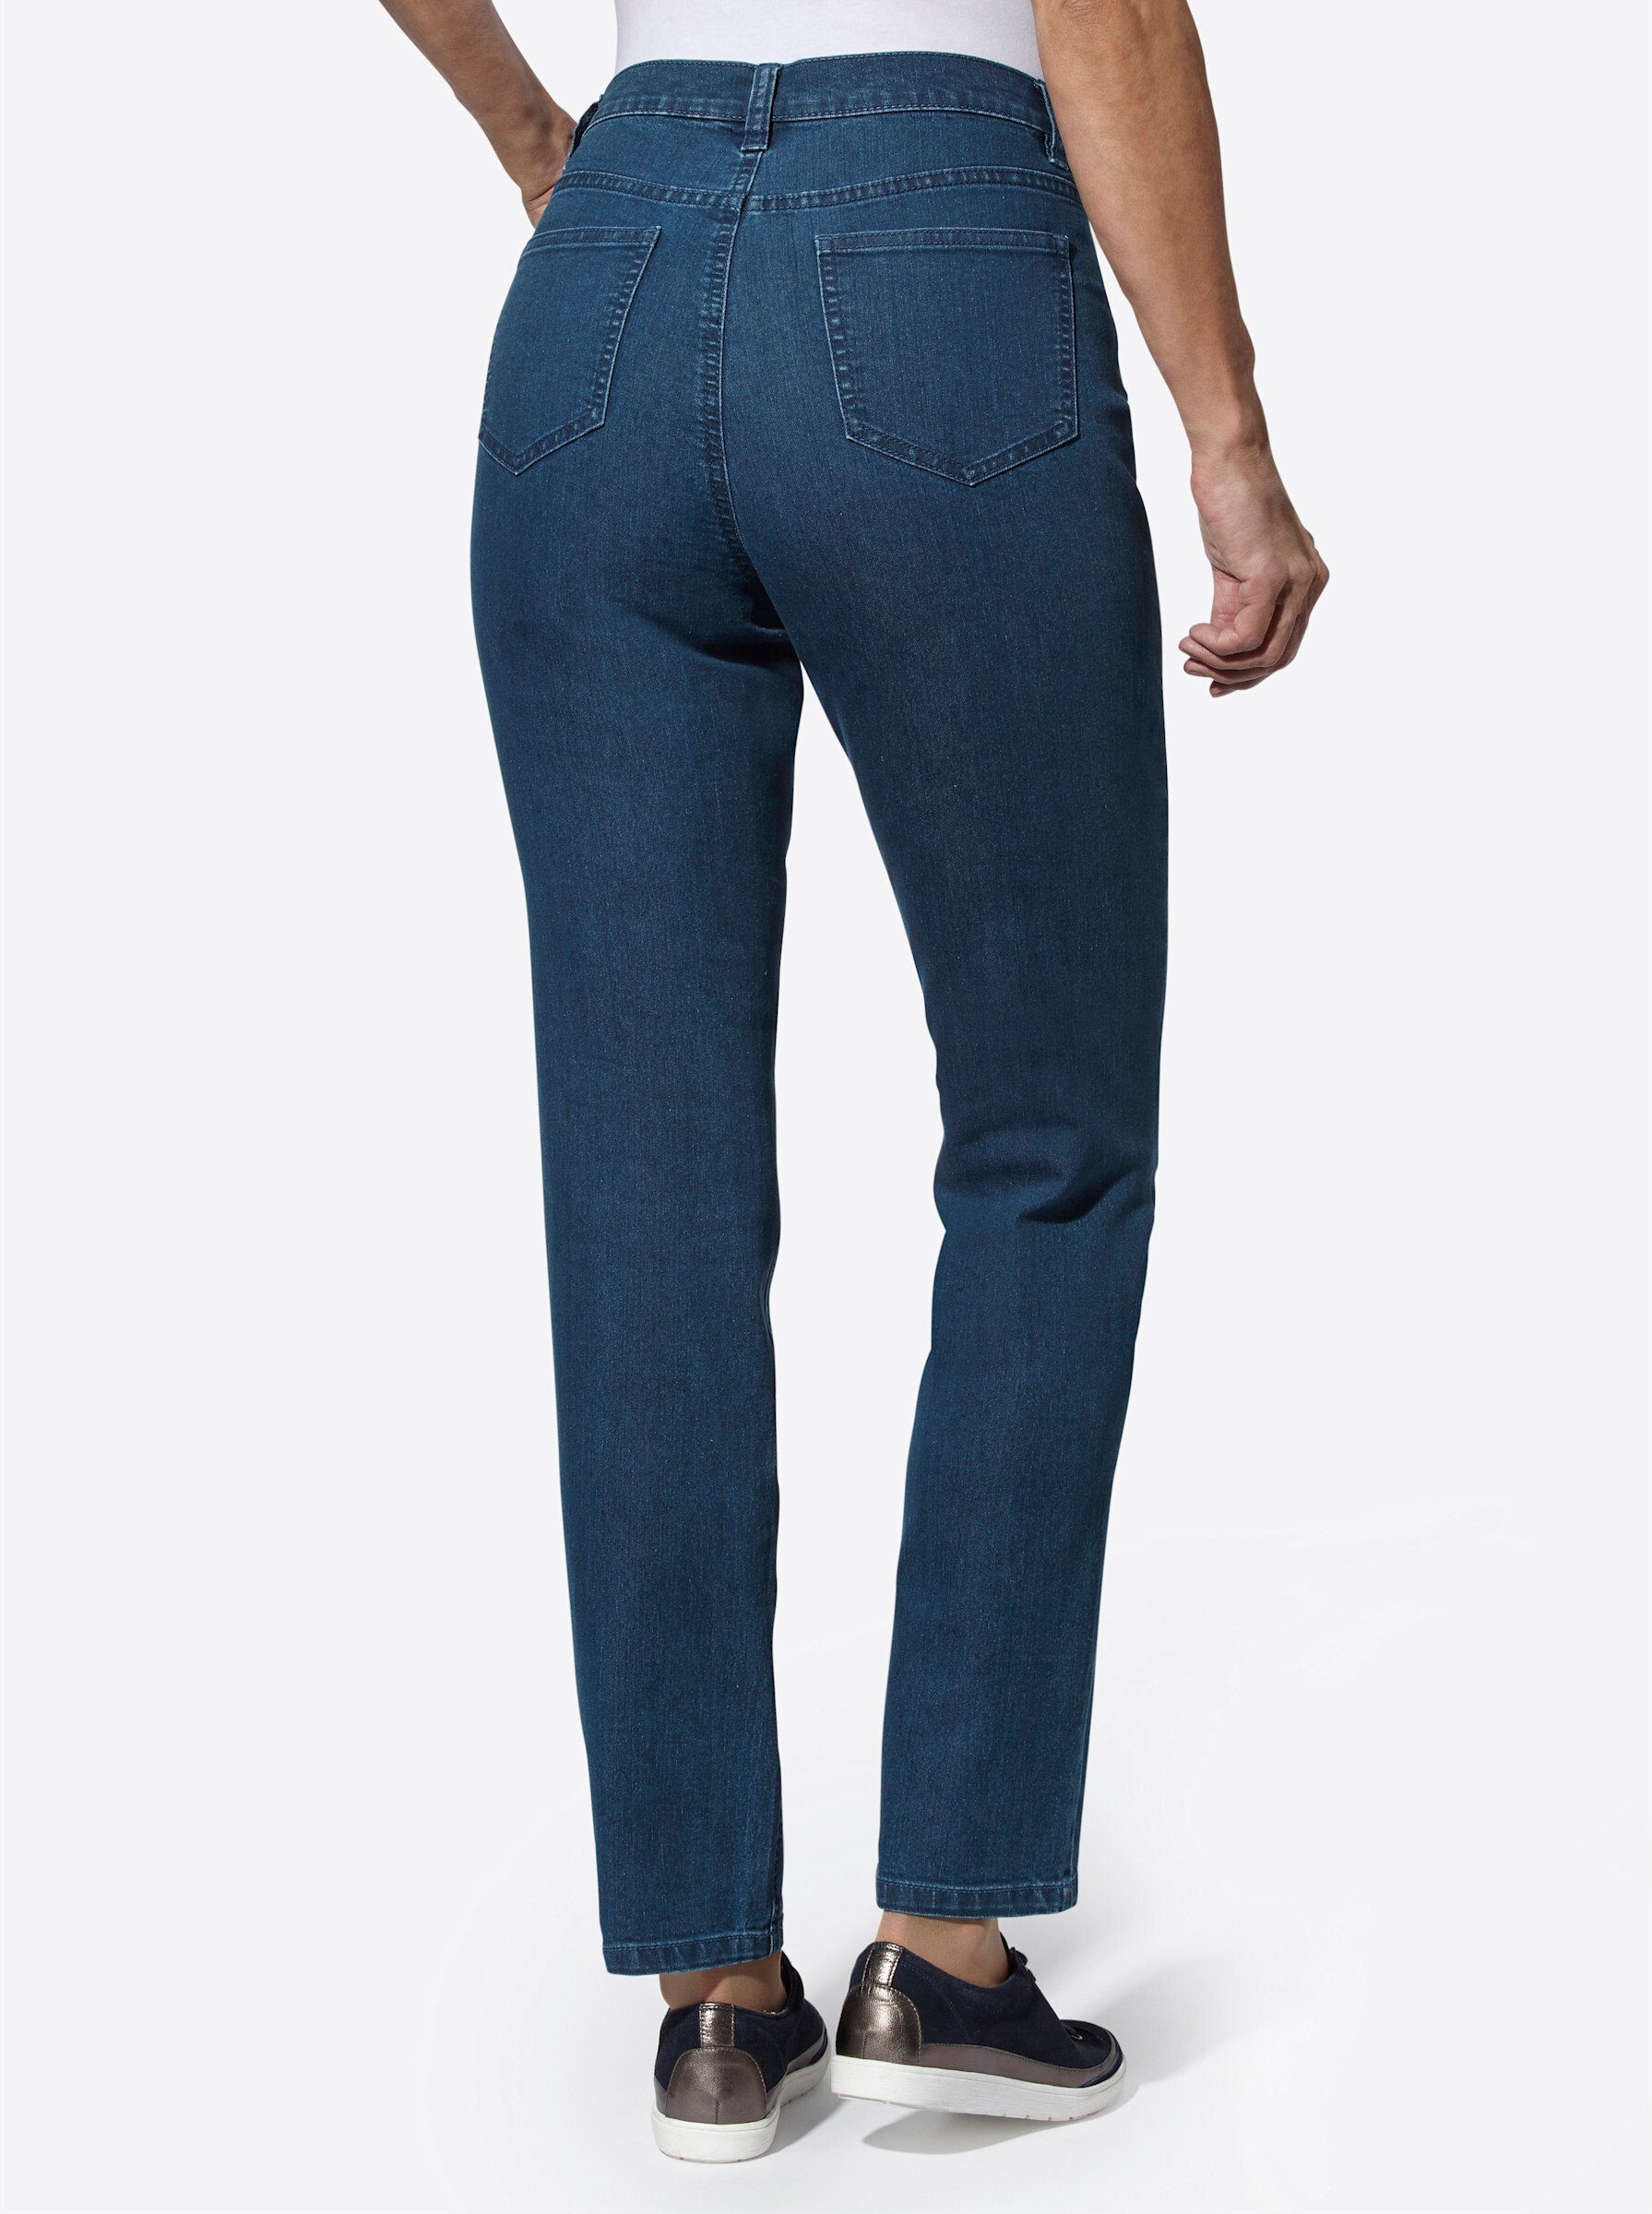 blue-stone-washed Bequeme Jeans an! Sieh